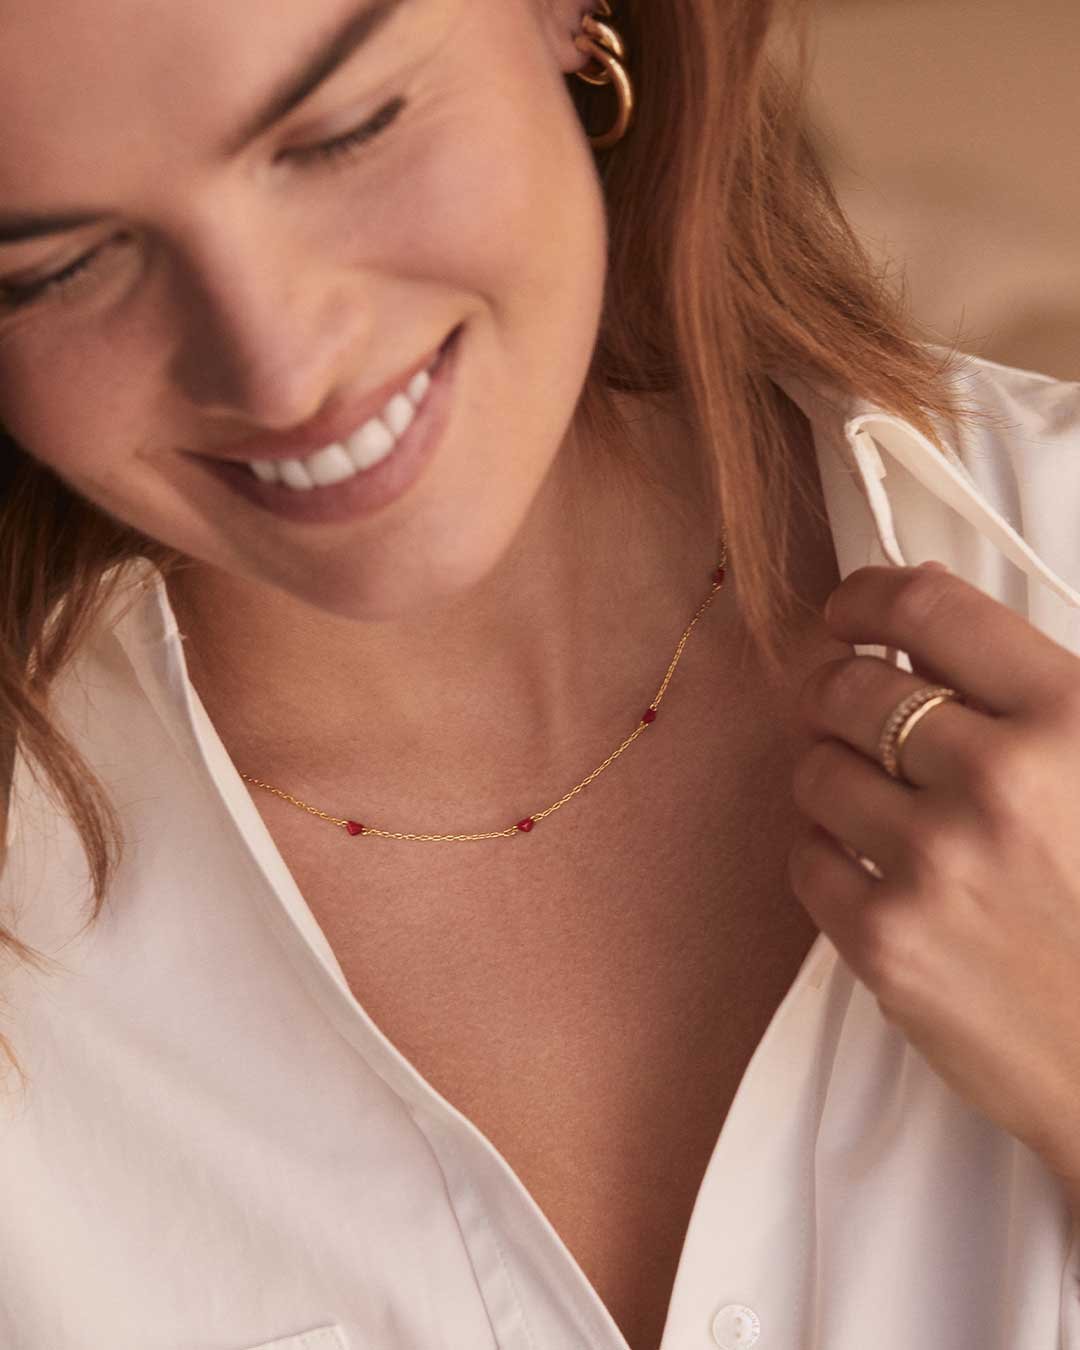 Woman wearing red heart necklaces and rings